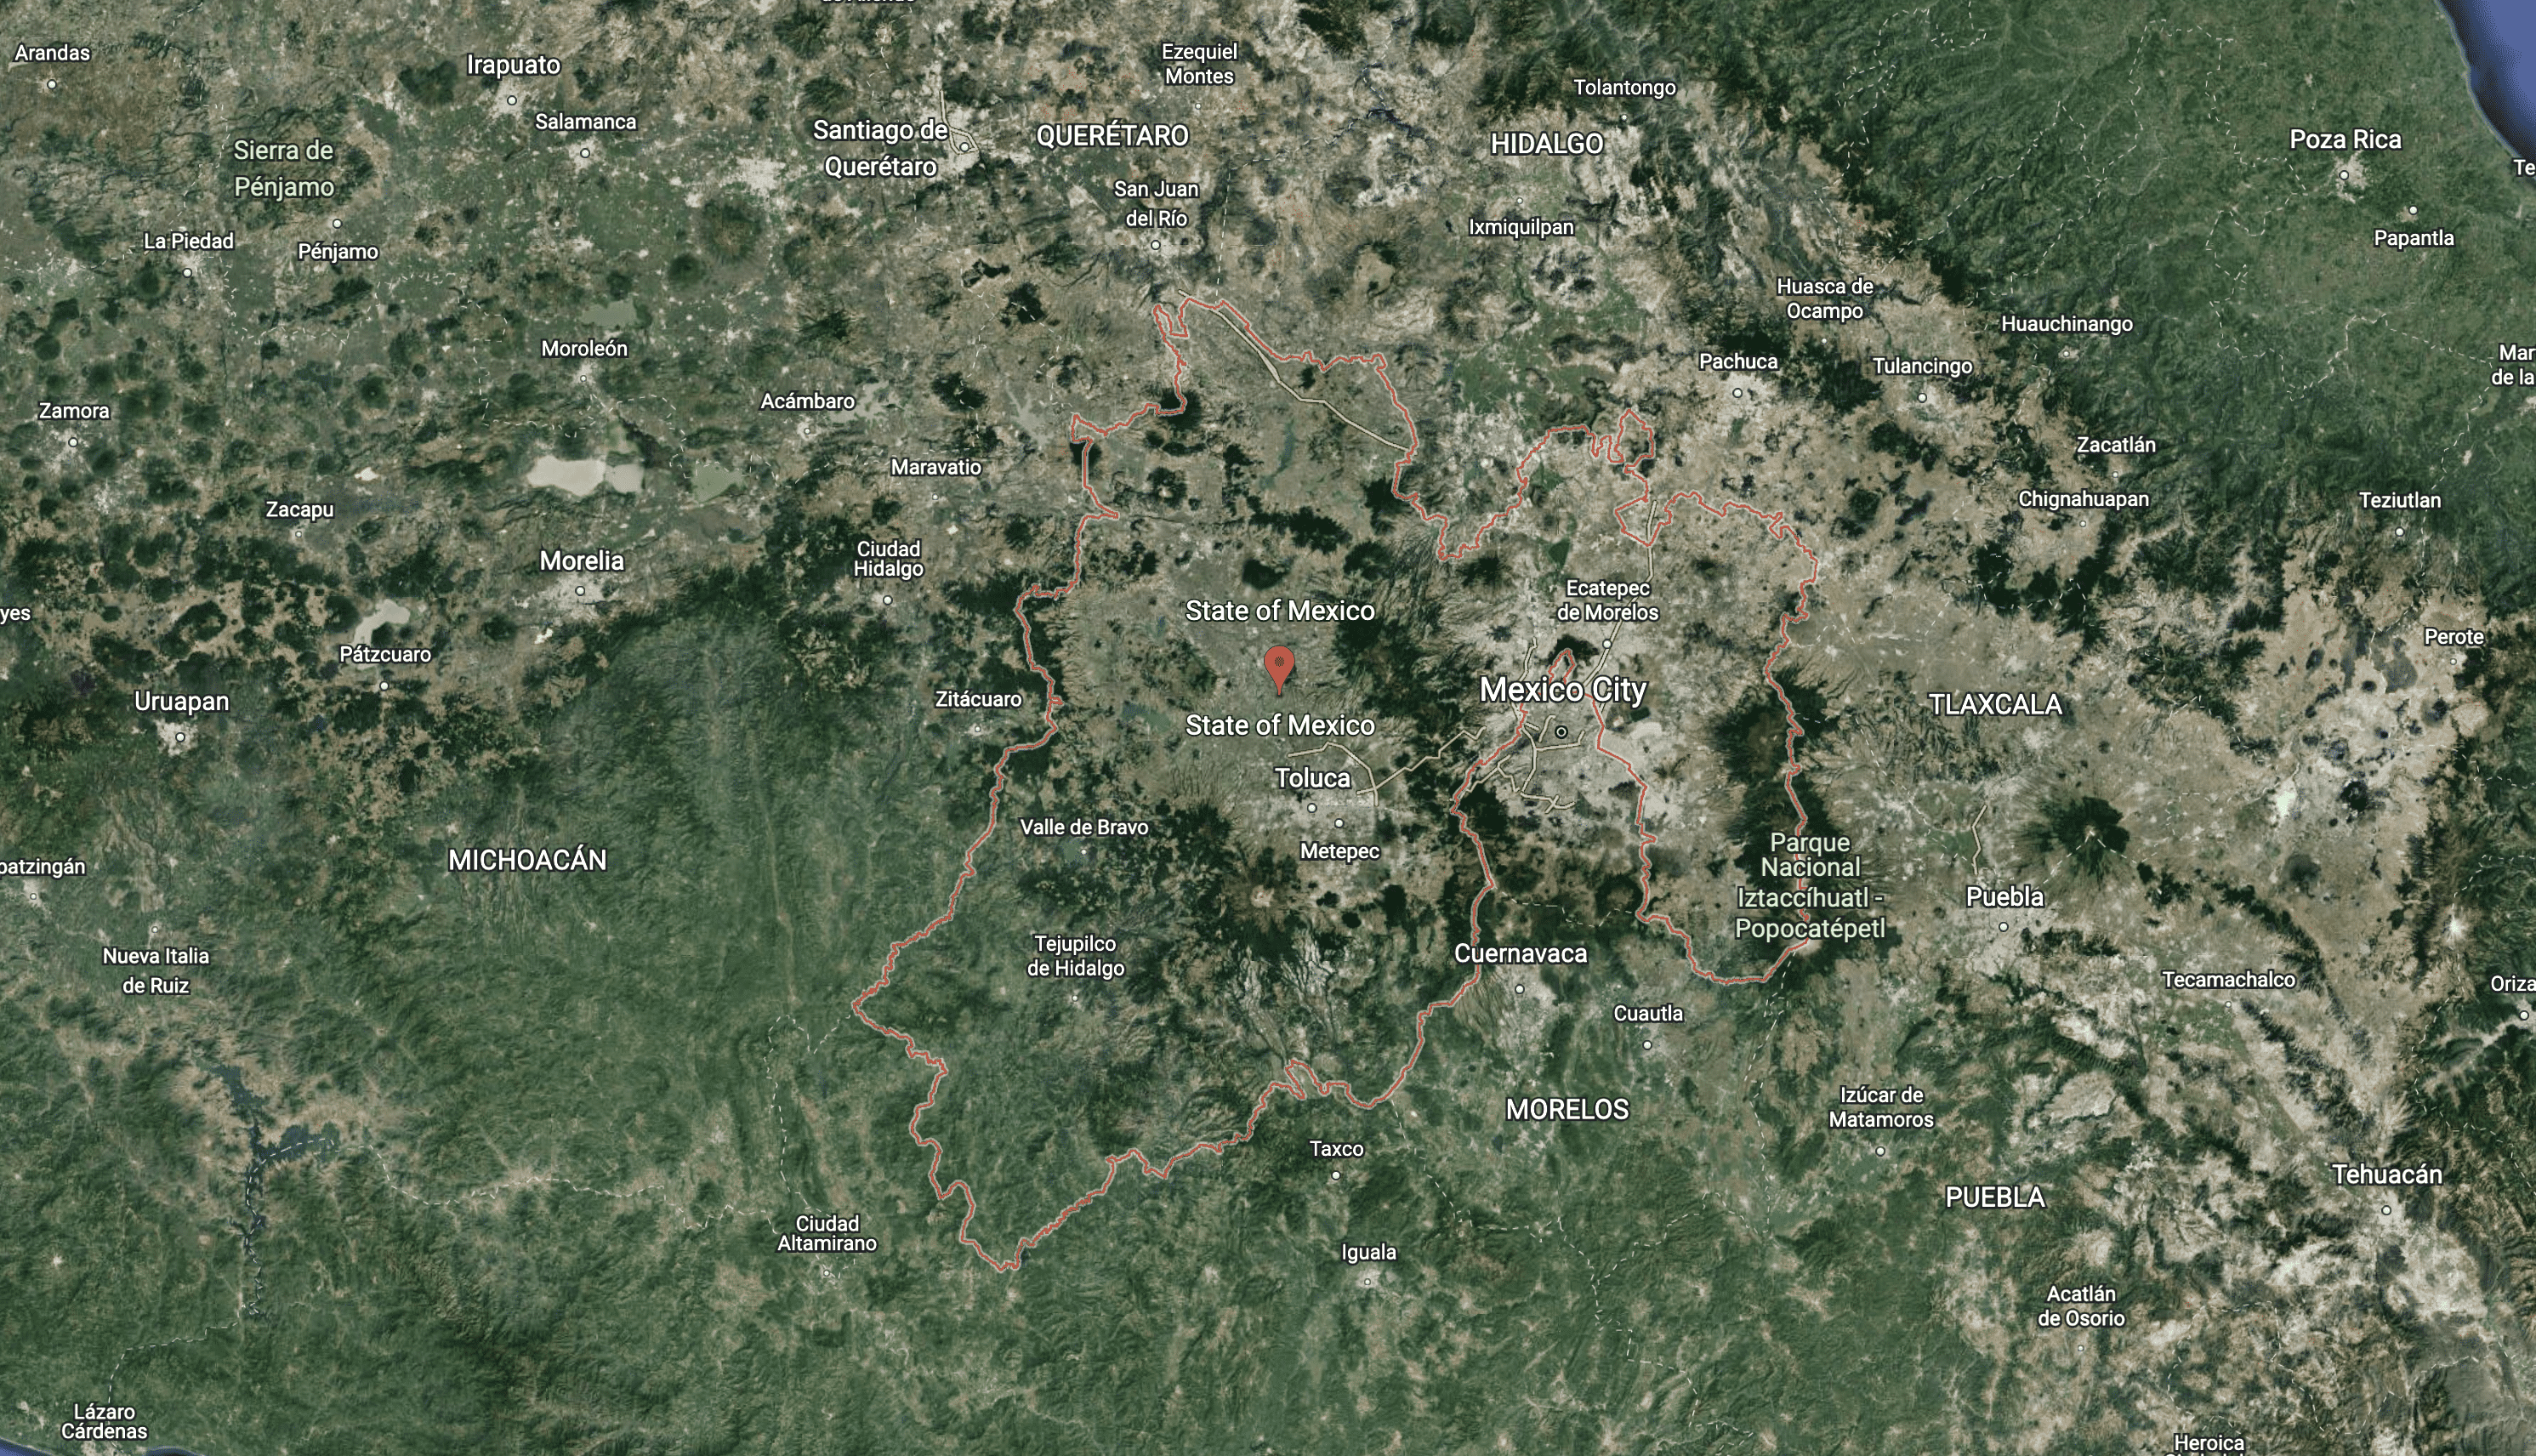 Google Earth Satellite Image of Mexico City